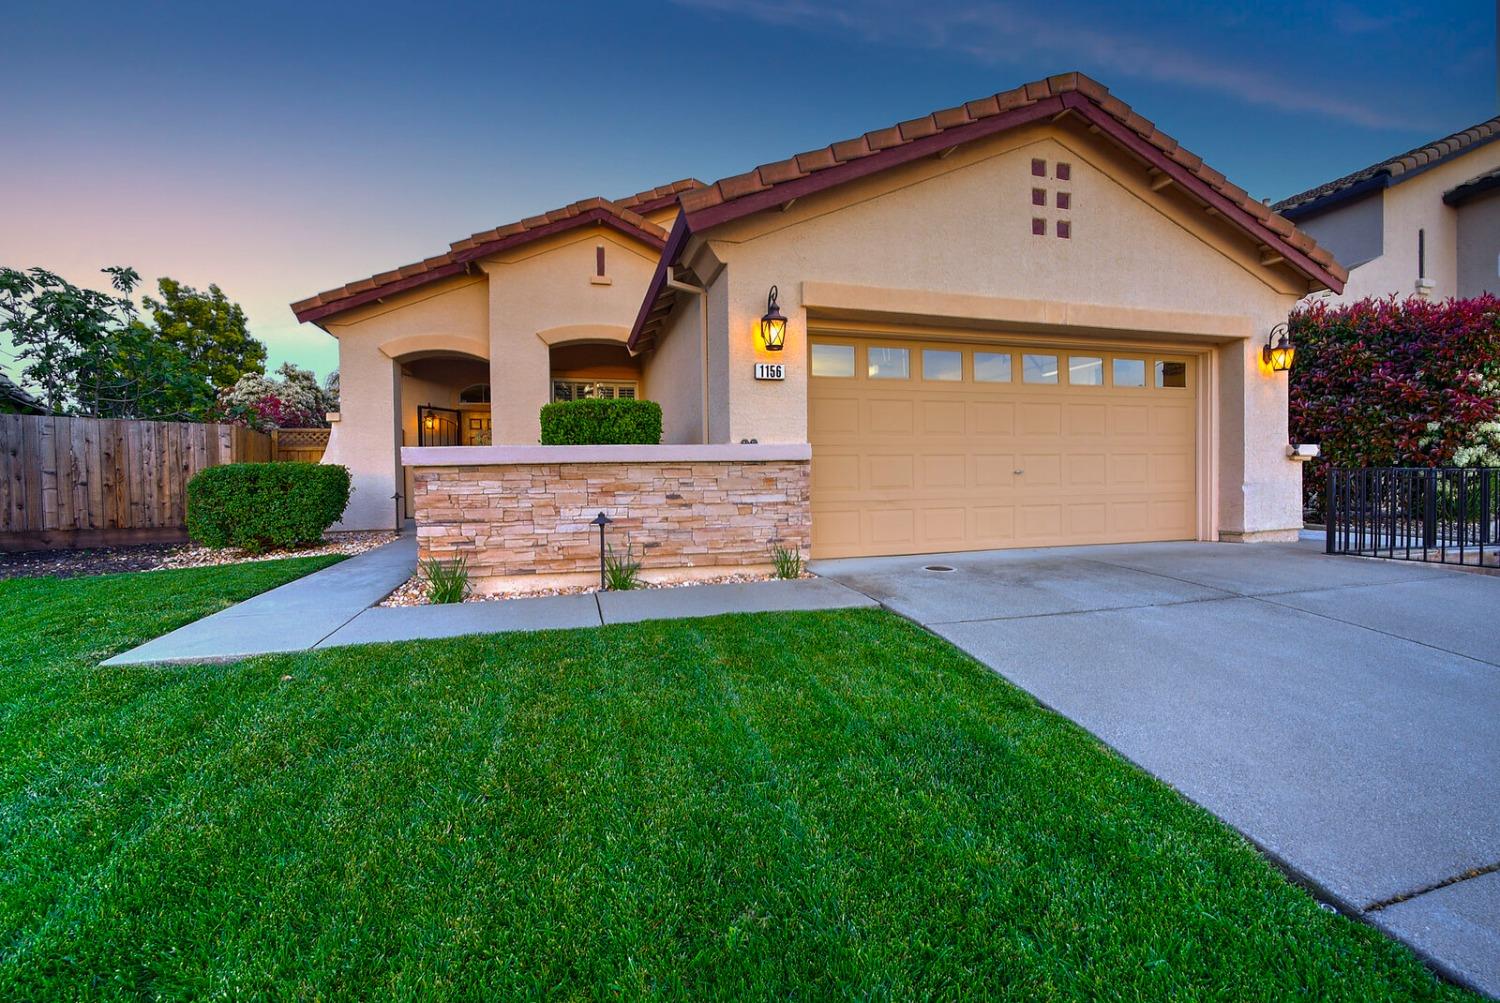 Photo of 1156 Formby Wy in Roseville, CA